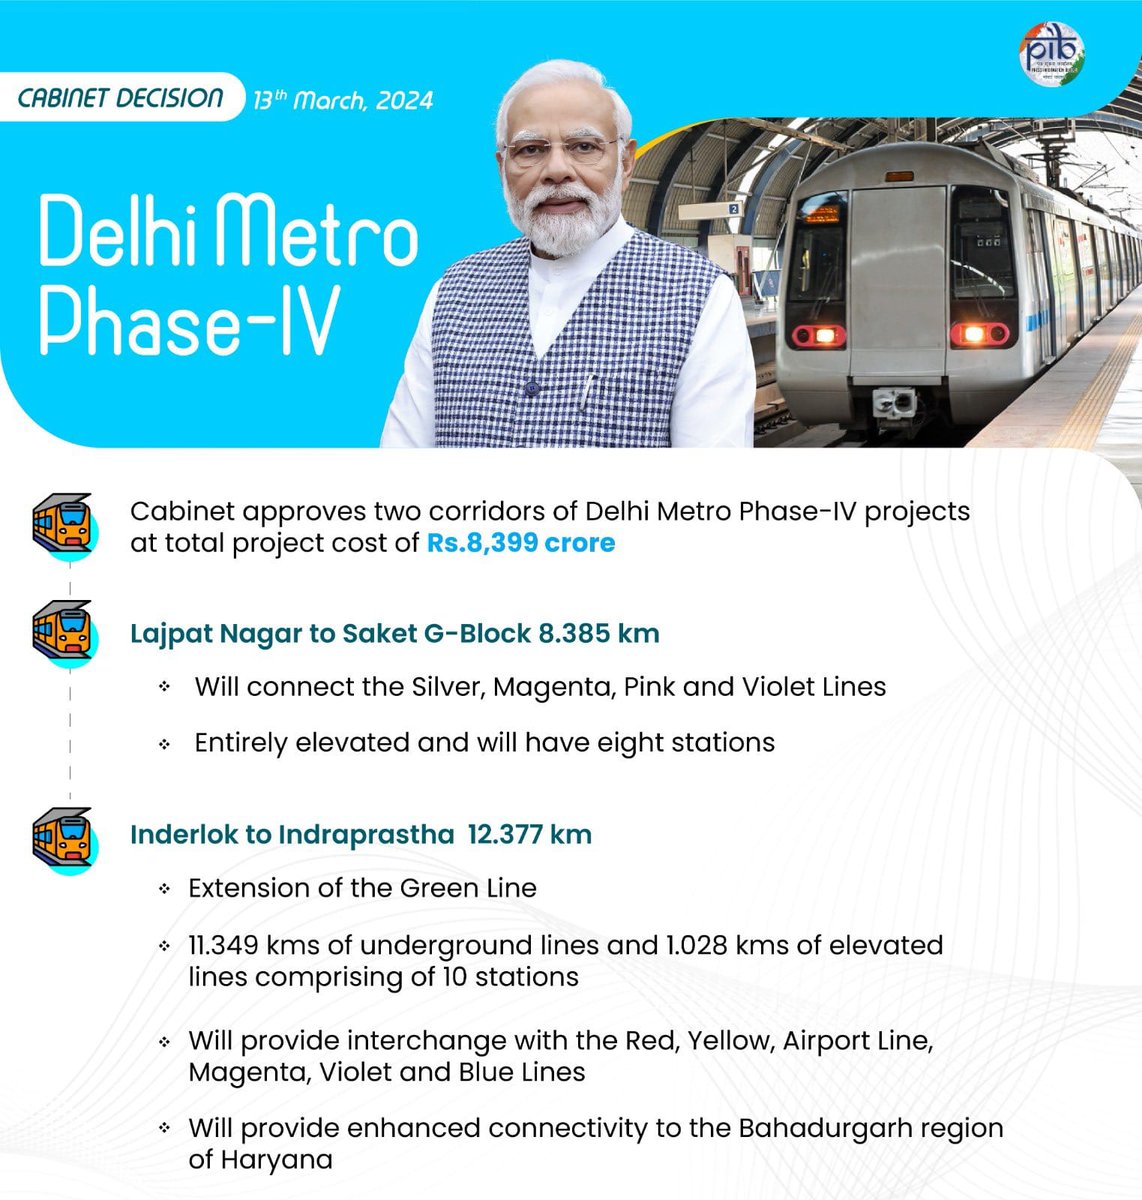 The Union Cabinet under the leadership of Hon'ble PM Shri @narendramodi ji approves two corridors viz Lajpat Nagar to Saket G-Block and Inderlok to Indraprastha, of Delhi Metro Phase-IV projects at total project cost of Rs.8,399 crore.

#CabinetDecisions